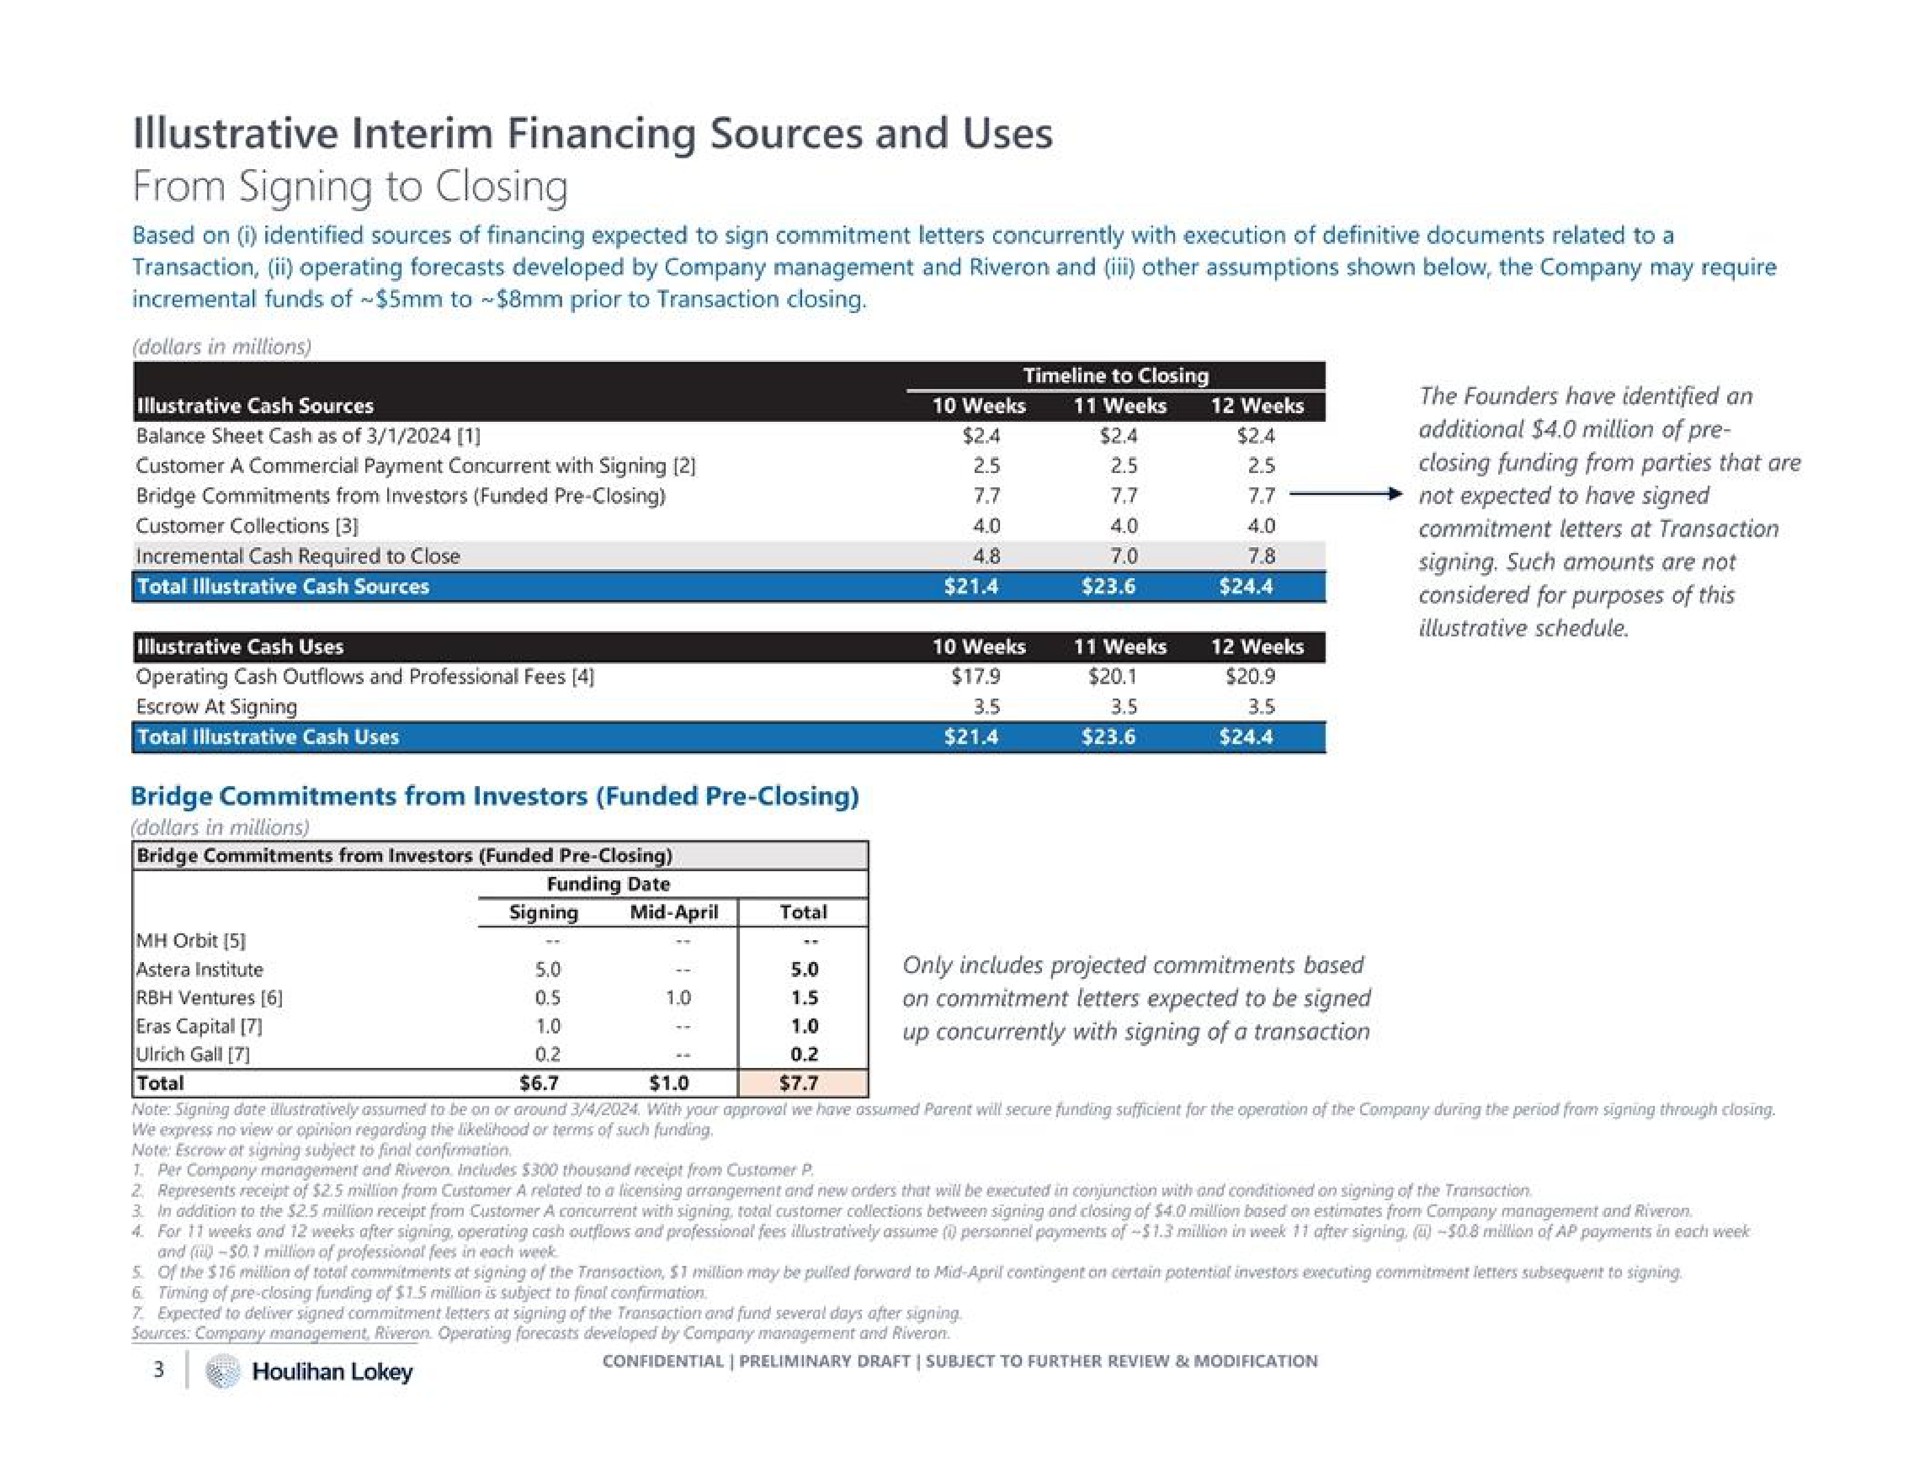 illustrative interim financing sources and uses from signing to closing | Houlihan Lokey